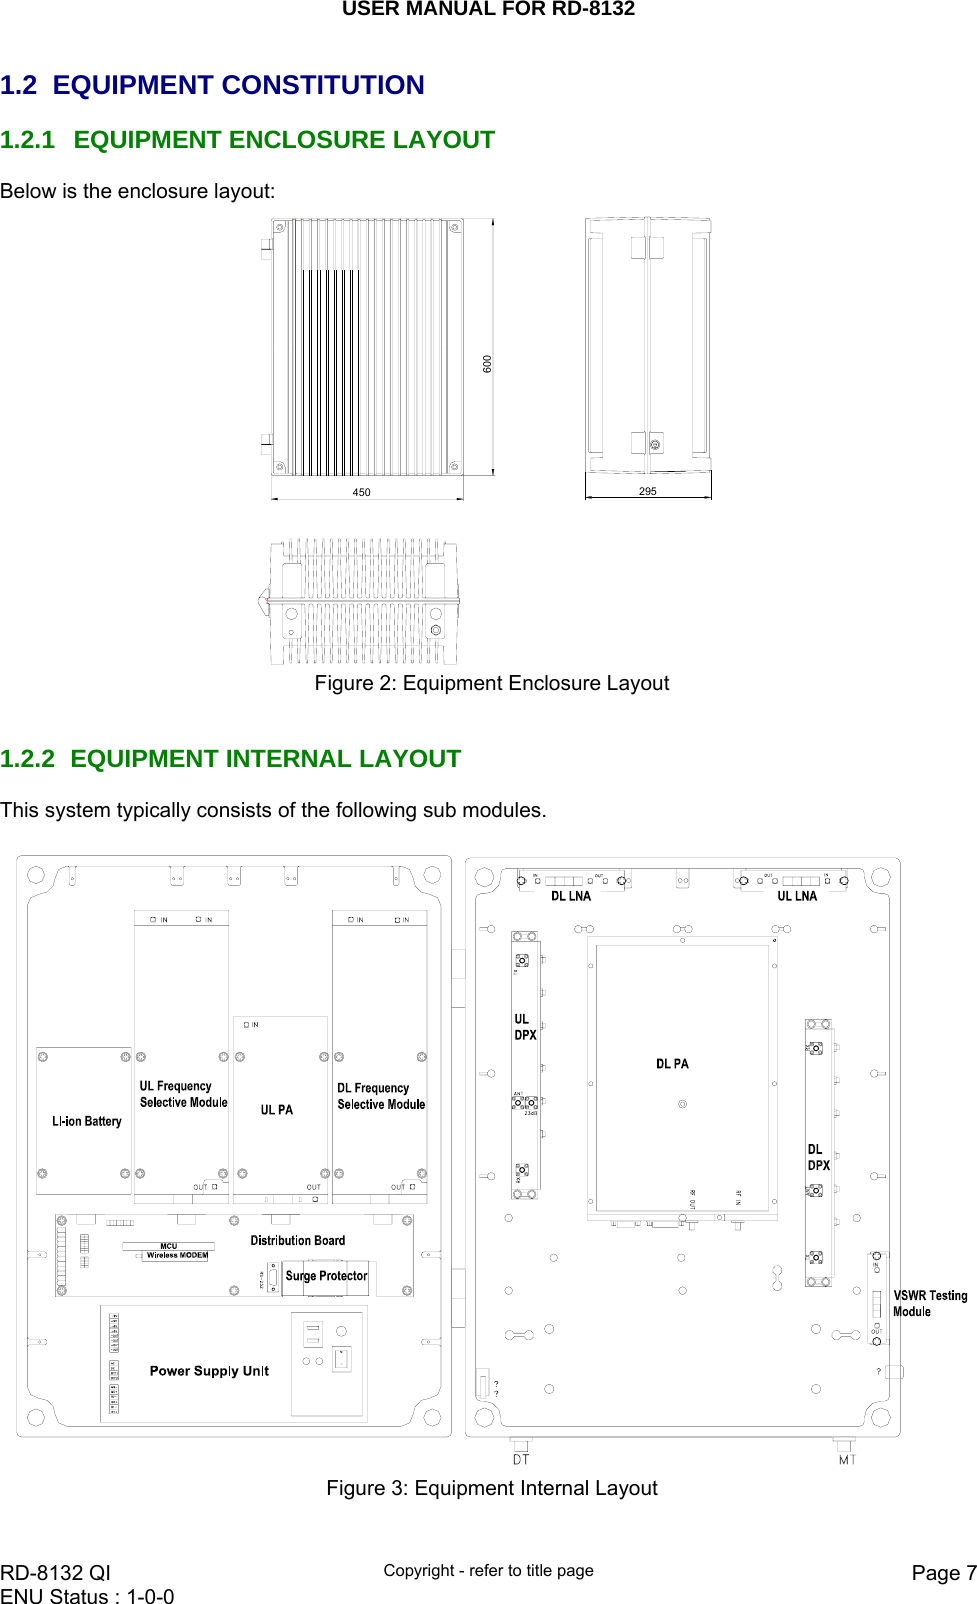 USER MANUAL FOR RD-8132    RD-8132 QI  Copyright - refer to title page  Page 7ENU Status : 1-0-0    1.2 EQUIPMENT CONSTITUTION 1.2.1   EQUIPMENT ENCLOSURE LAYOUT Below is the enclosure layout: 295450600 Figure 2: Equipment Enclosure Layout   1.2.2  EQUIPMENT INTERNAL LAYOUT  This system typically consists of the following sub modules.   Figure 3: Equipment Internal Layout  